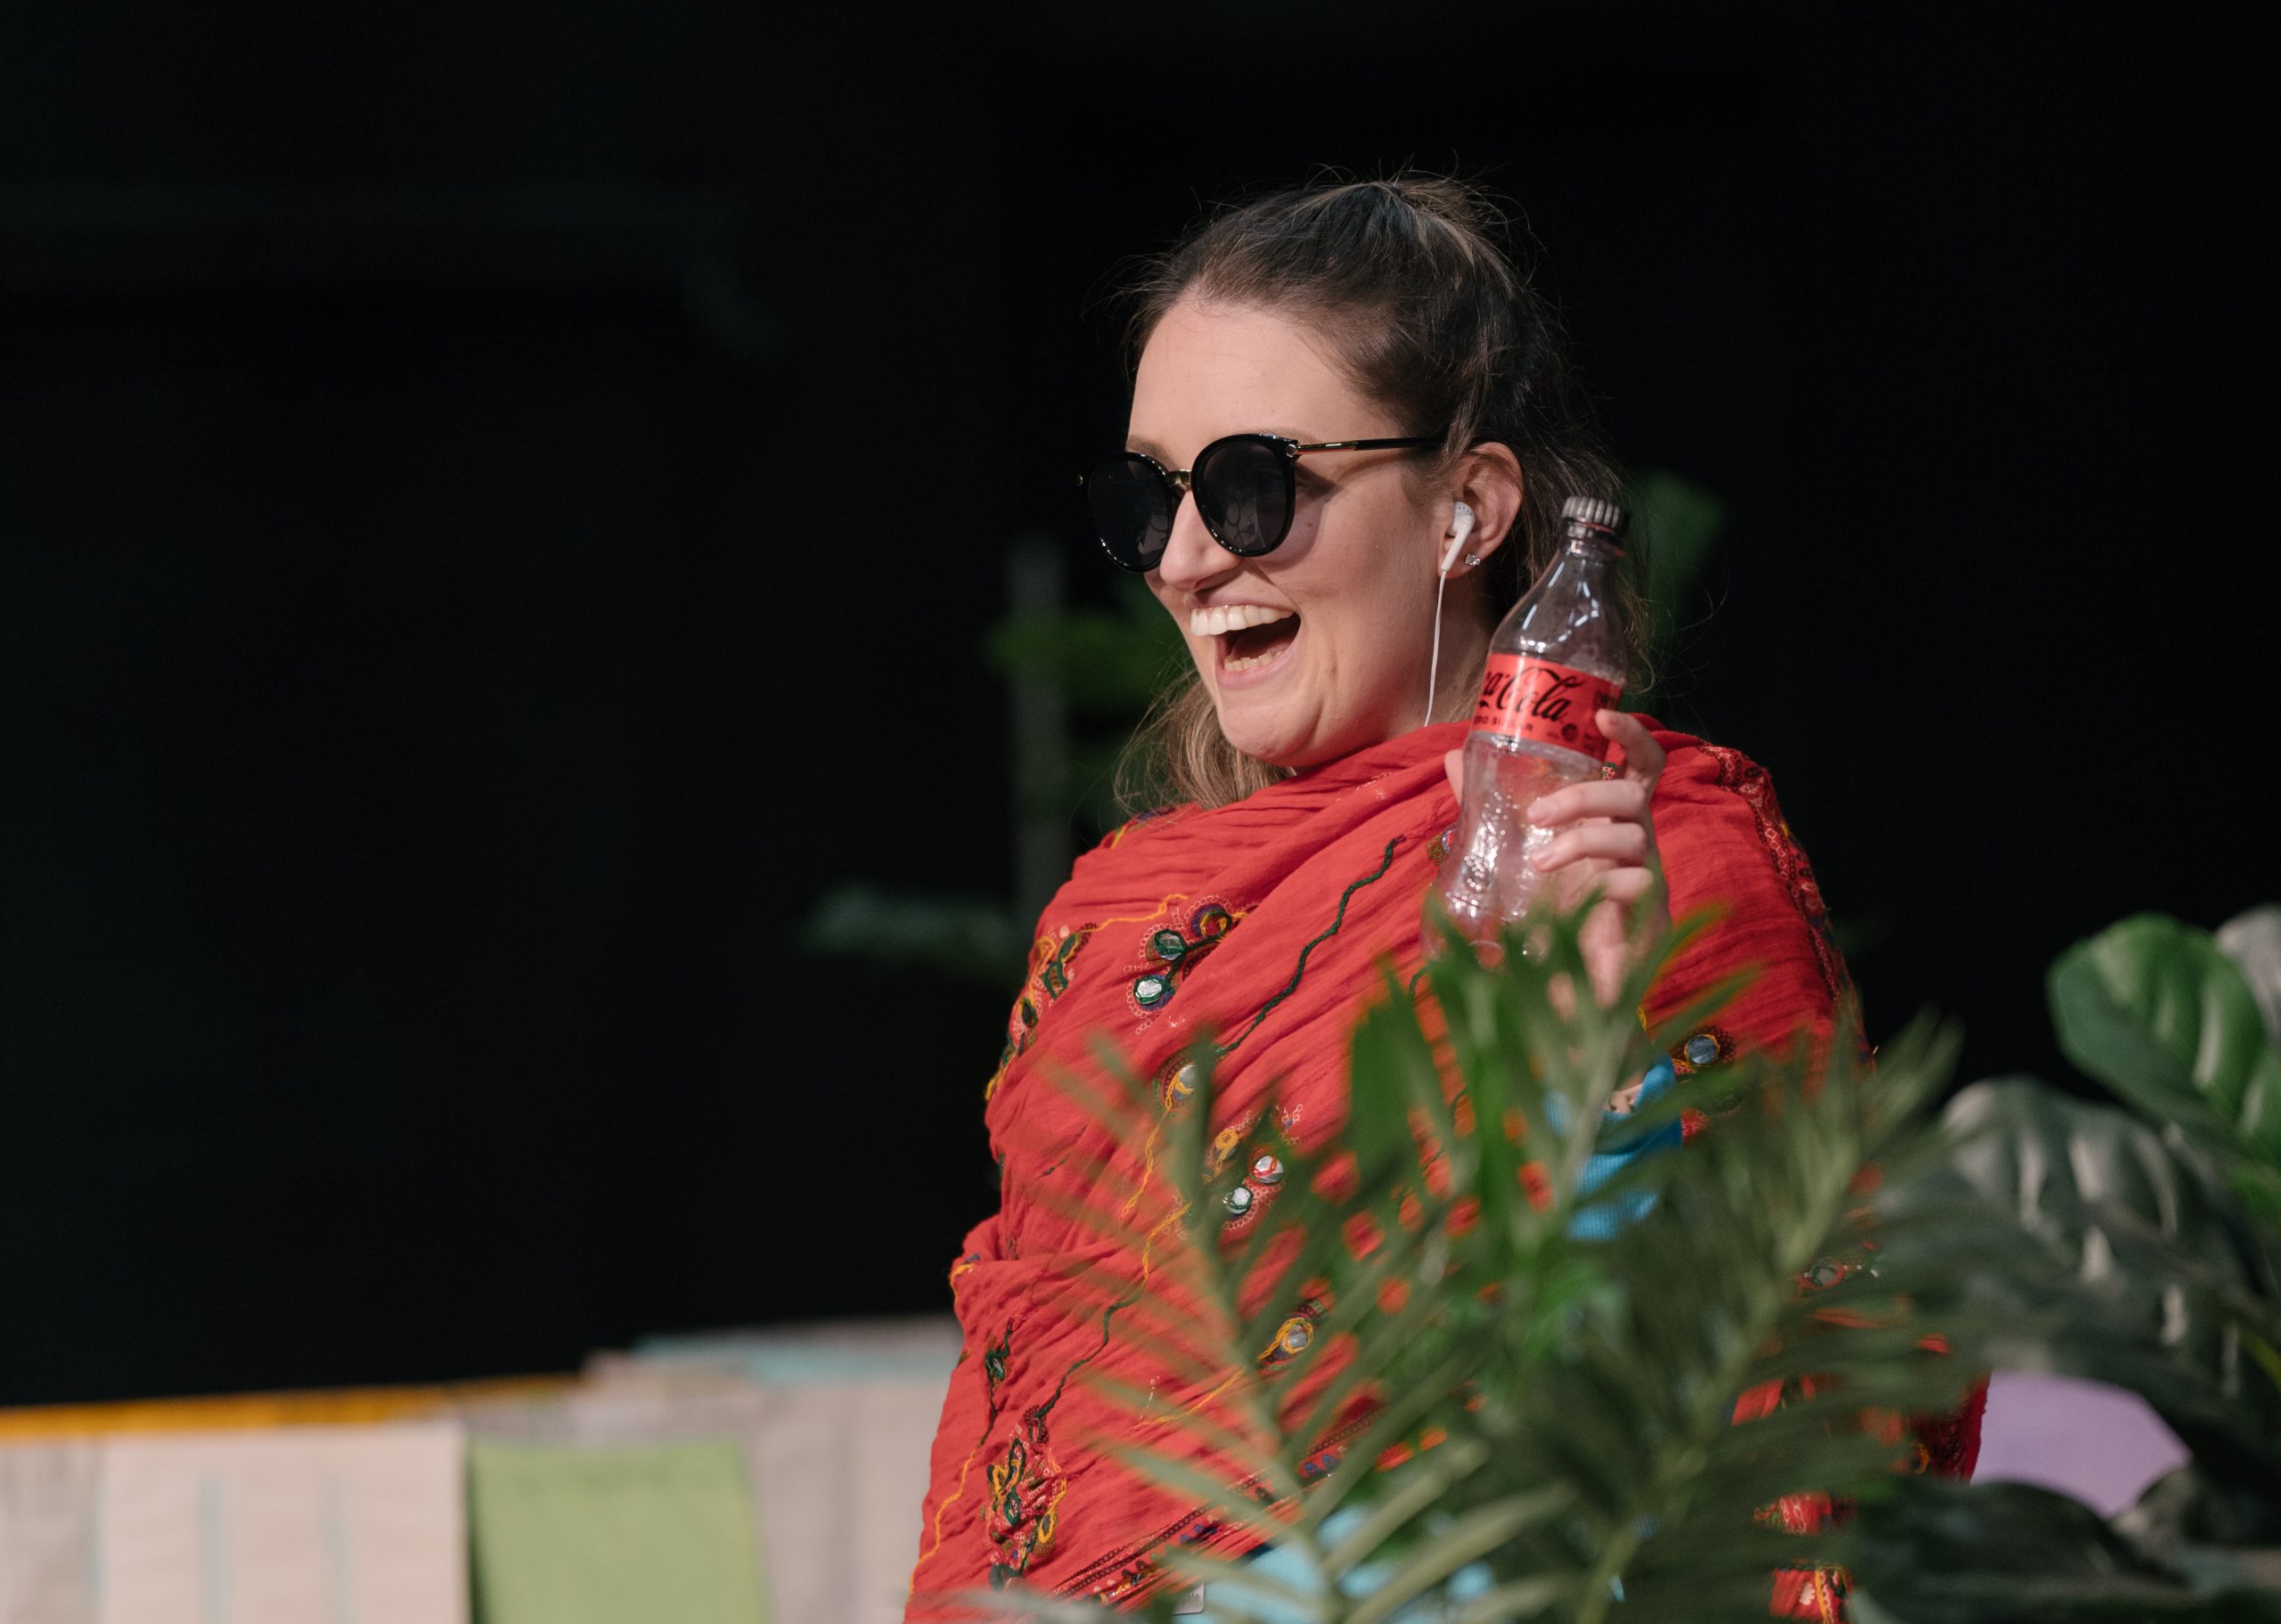 Actor Catherine Yates stands wearing sunglasses and a scarf while holding a coke bottle and grinning towards the audience